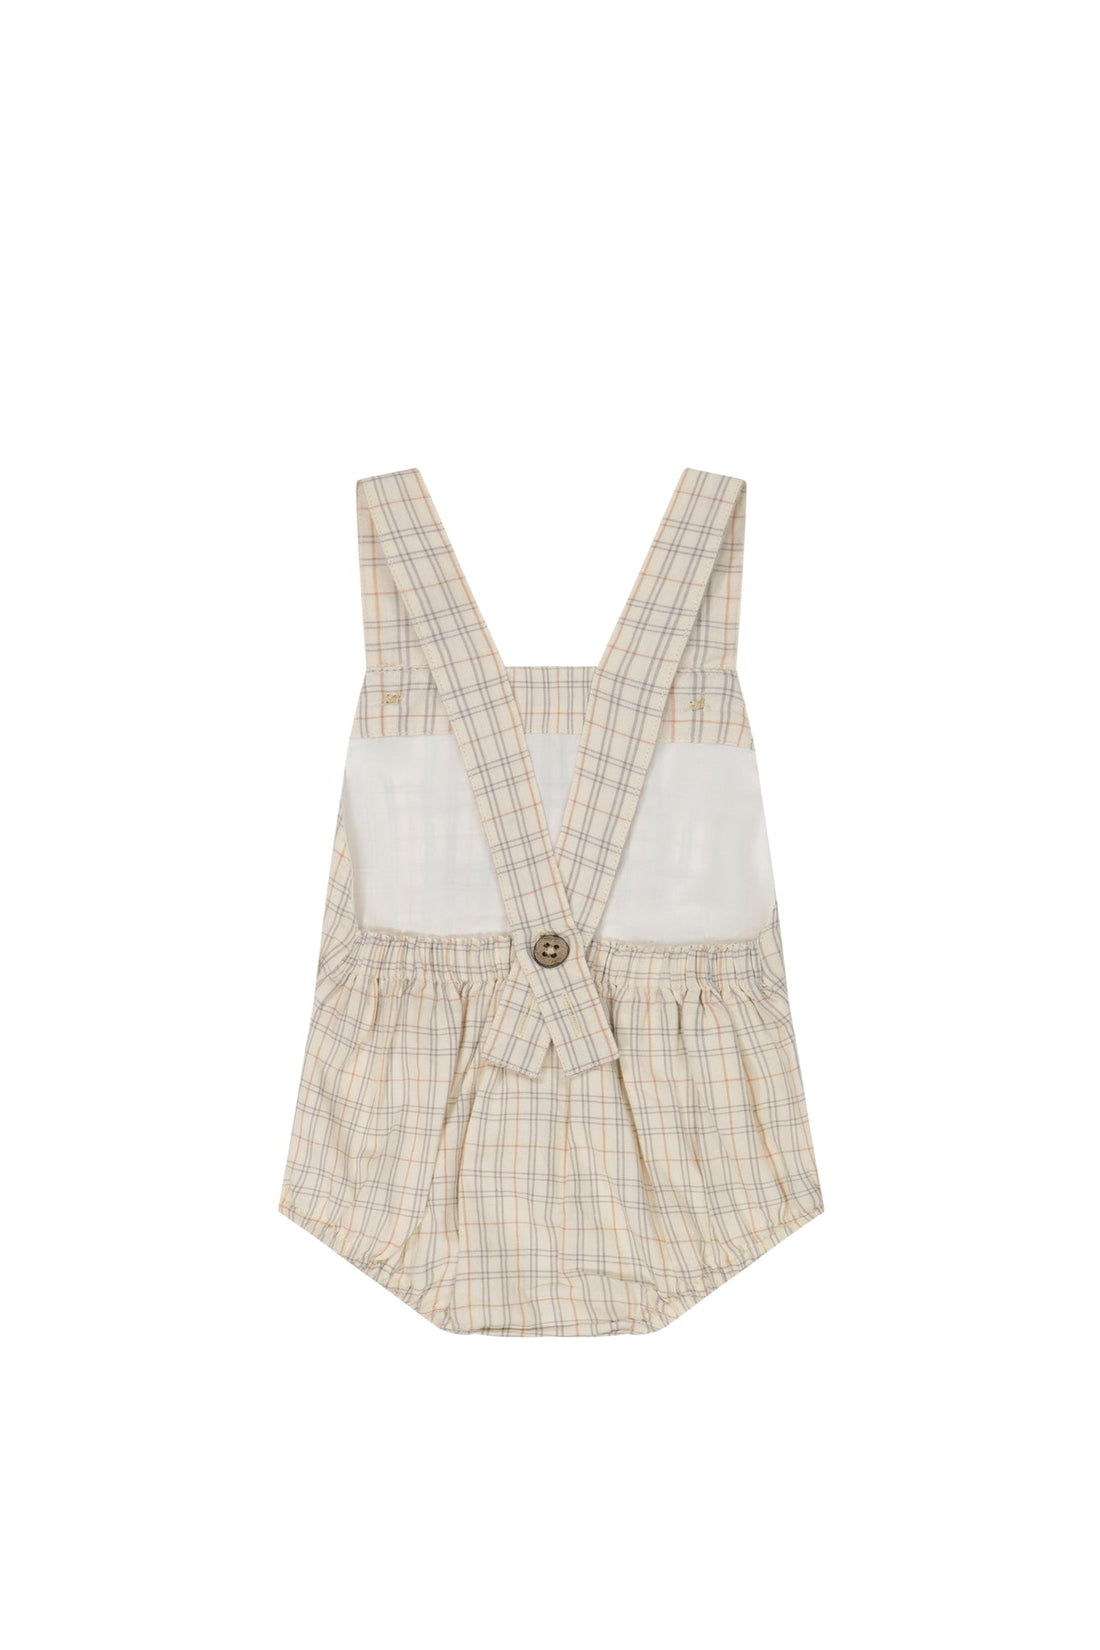 Organic Cotton Samy Playsuit - Billy Check Childrens Playsuit from Jamie Kay USA